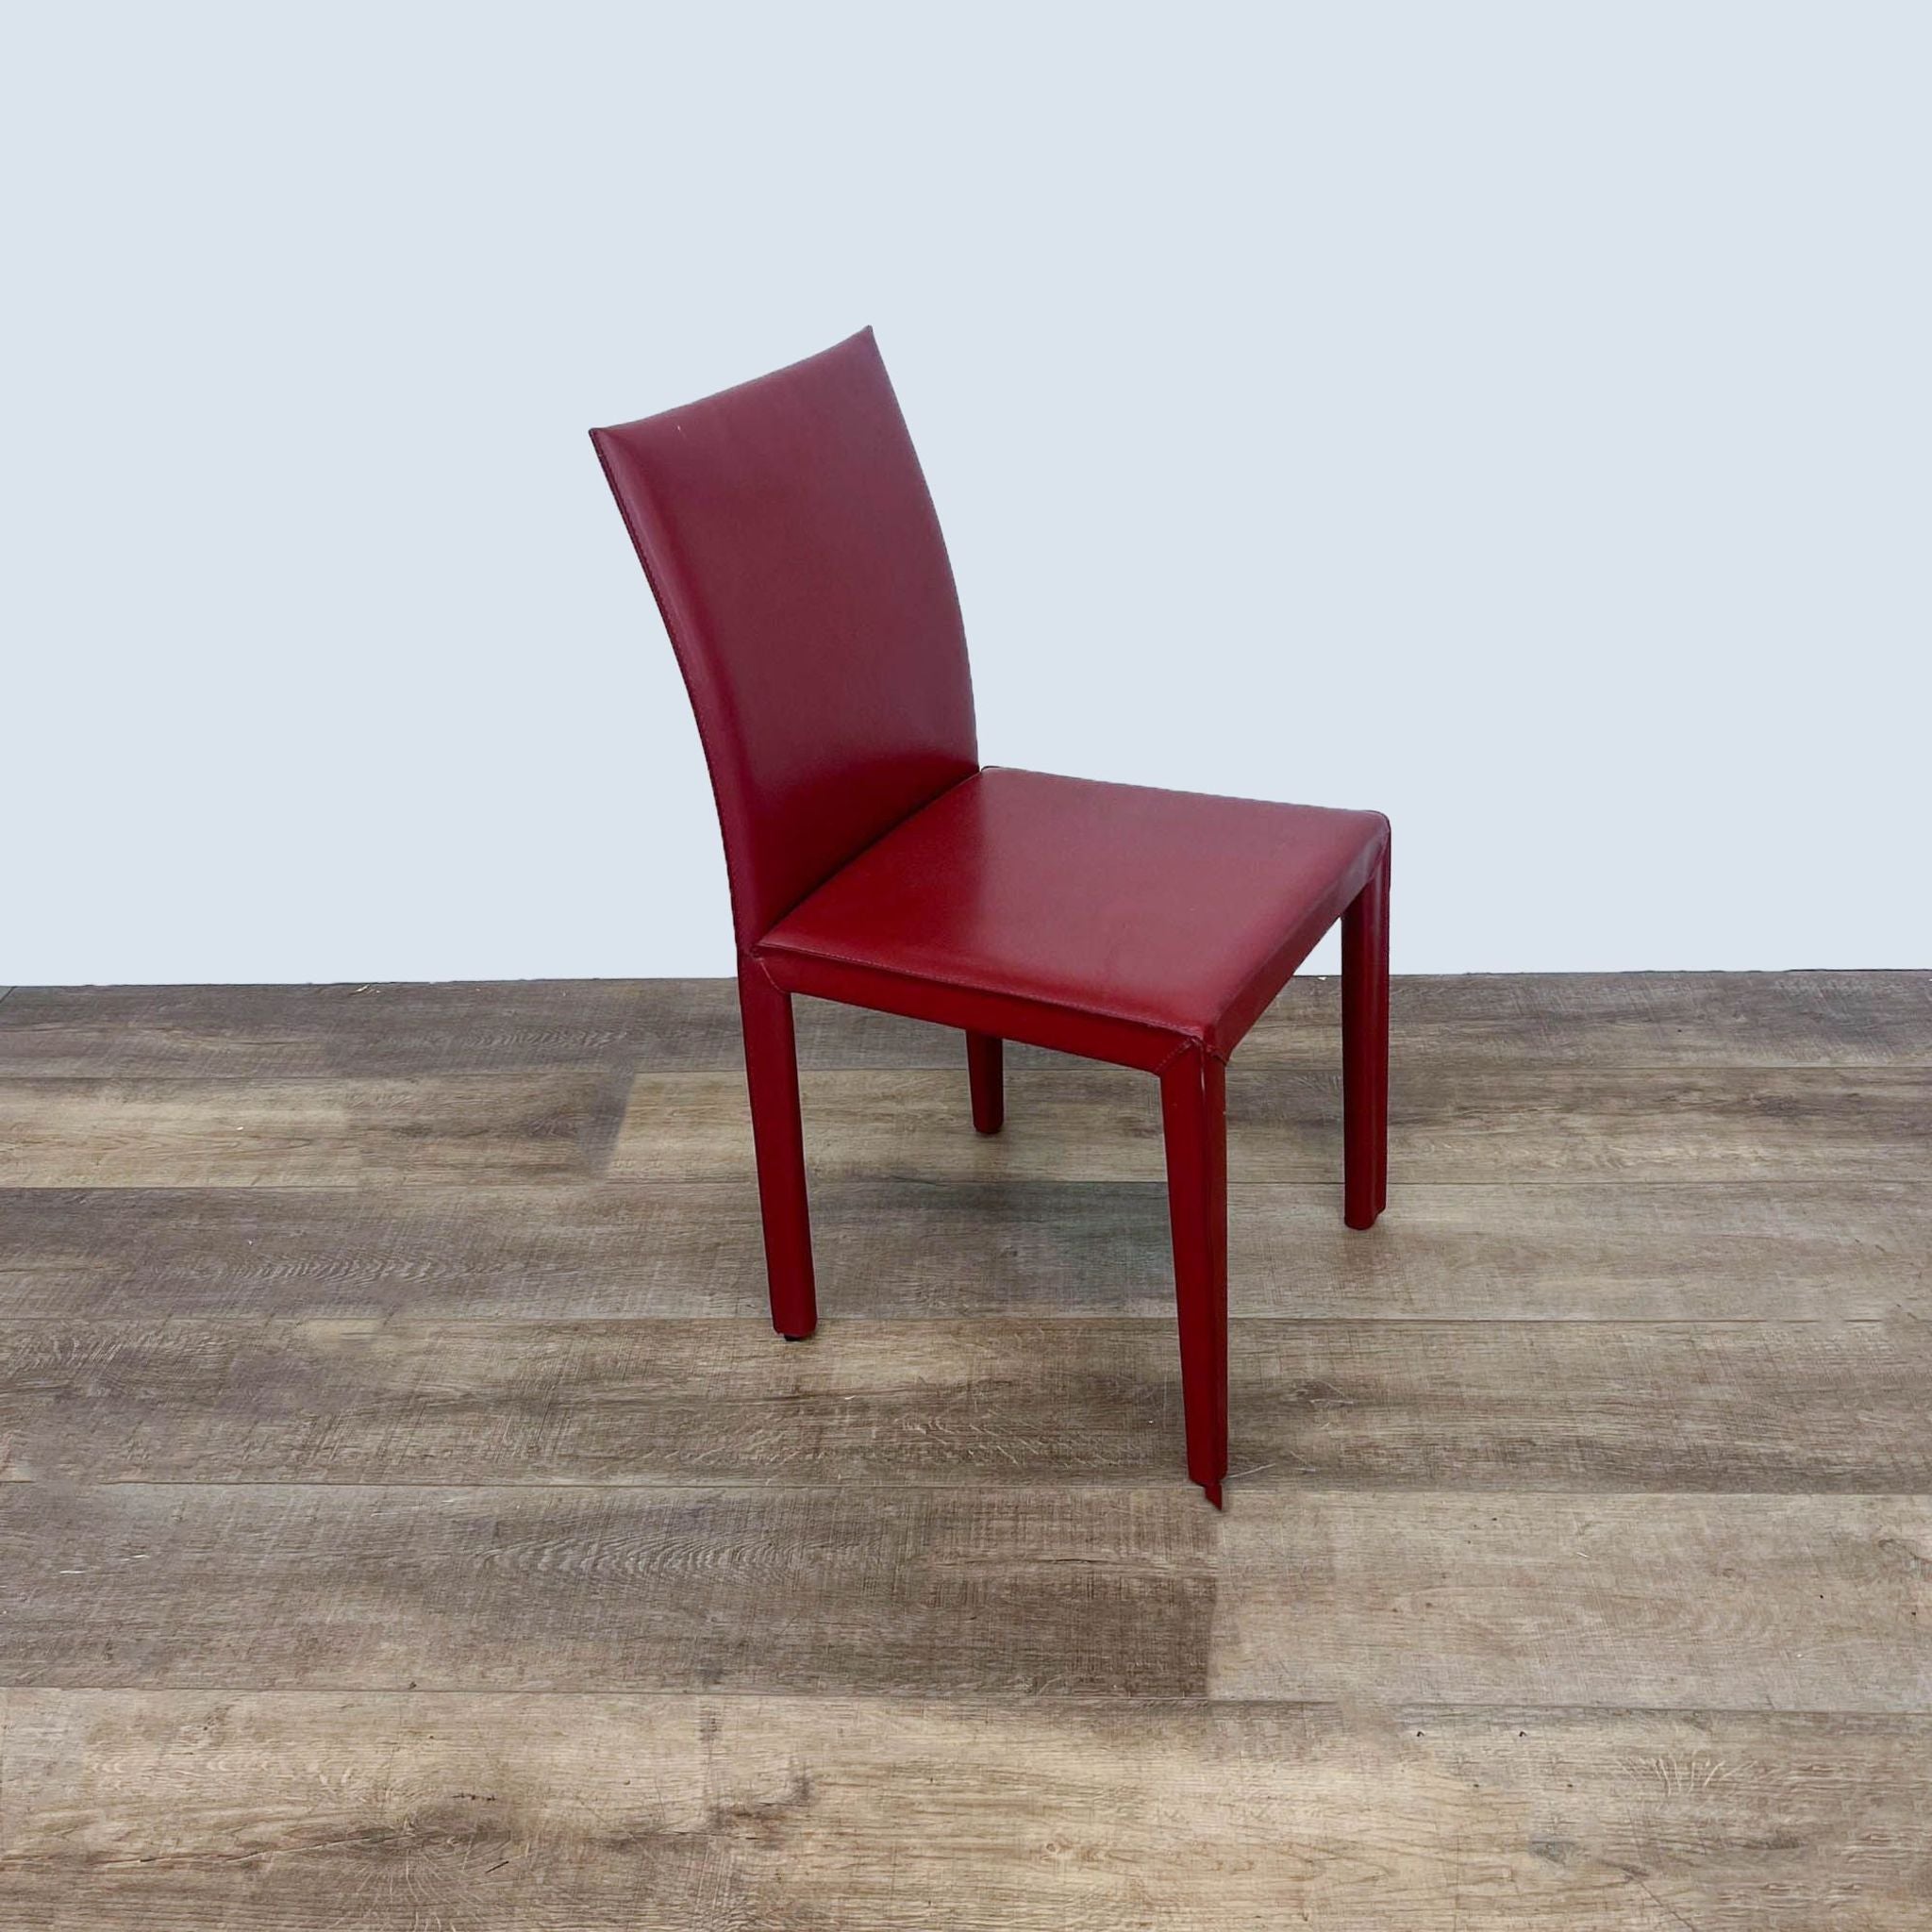 2. Close-up of red bonded leather upholstery on Maria Yee styled dining chair.